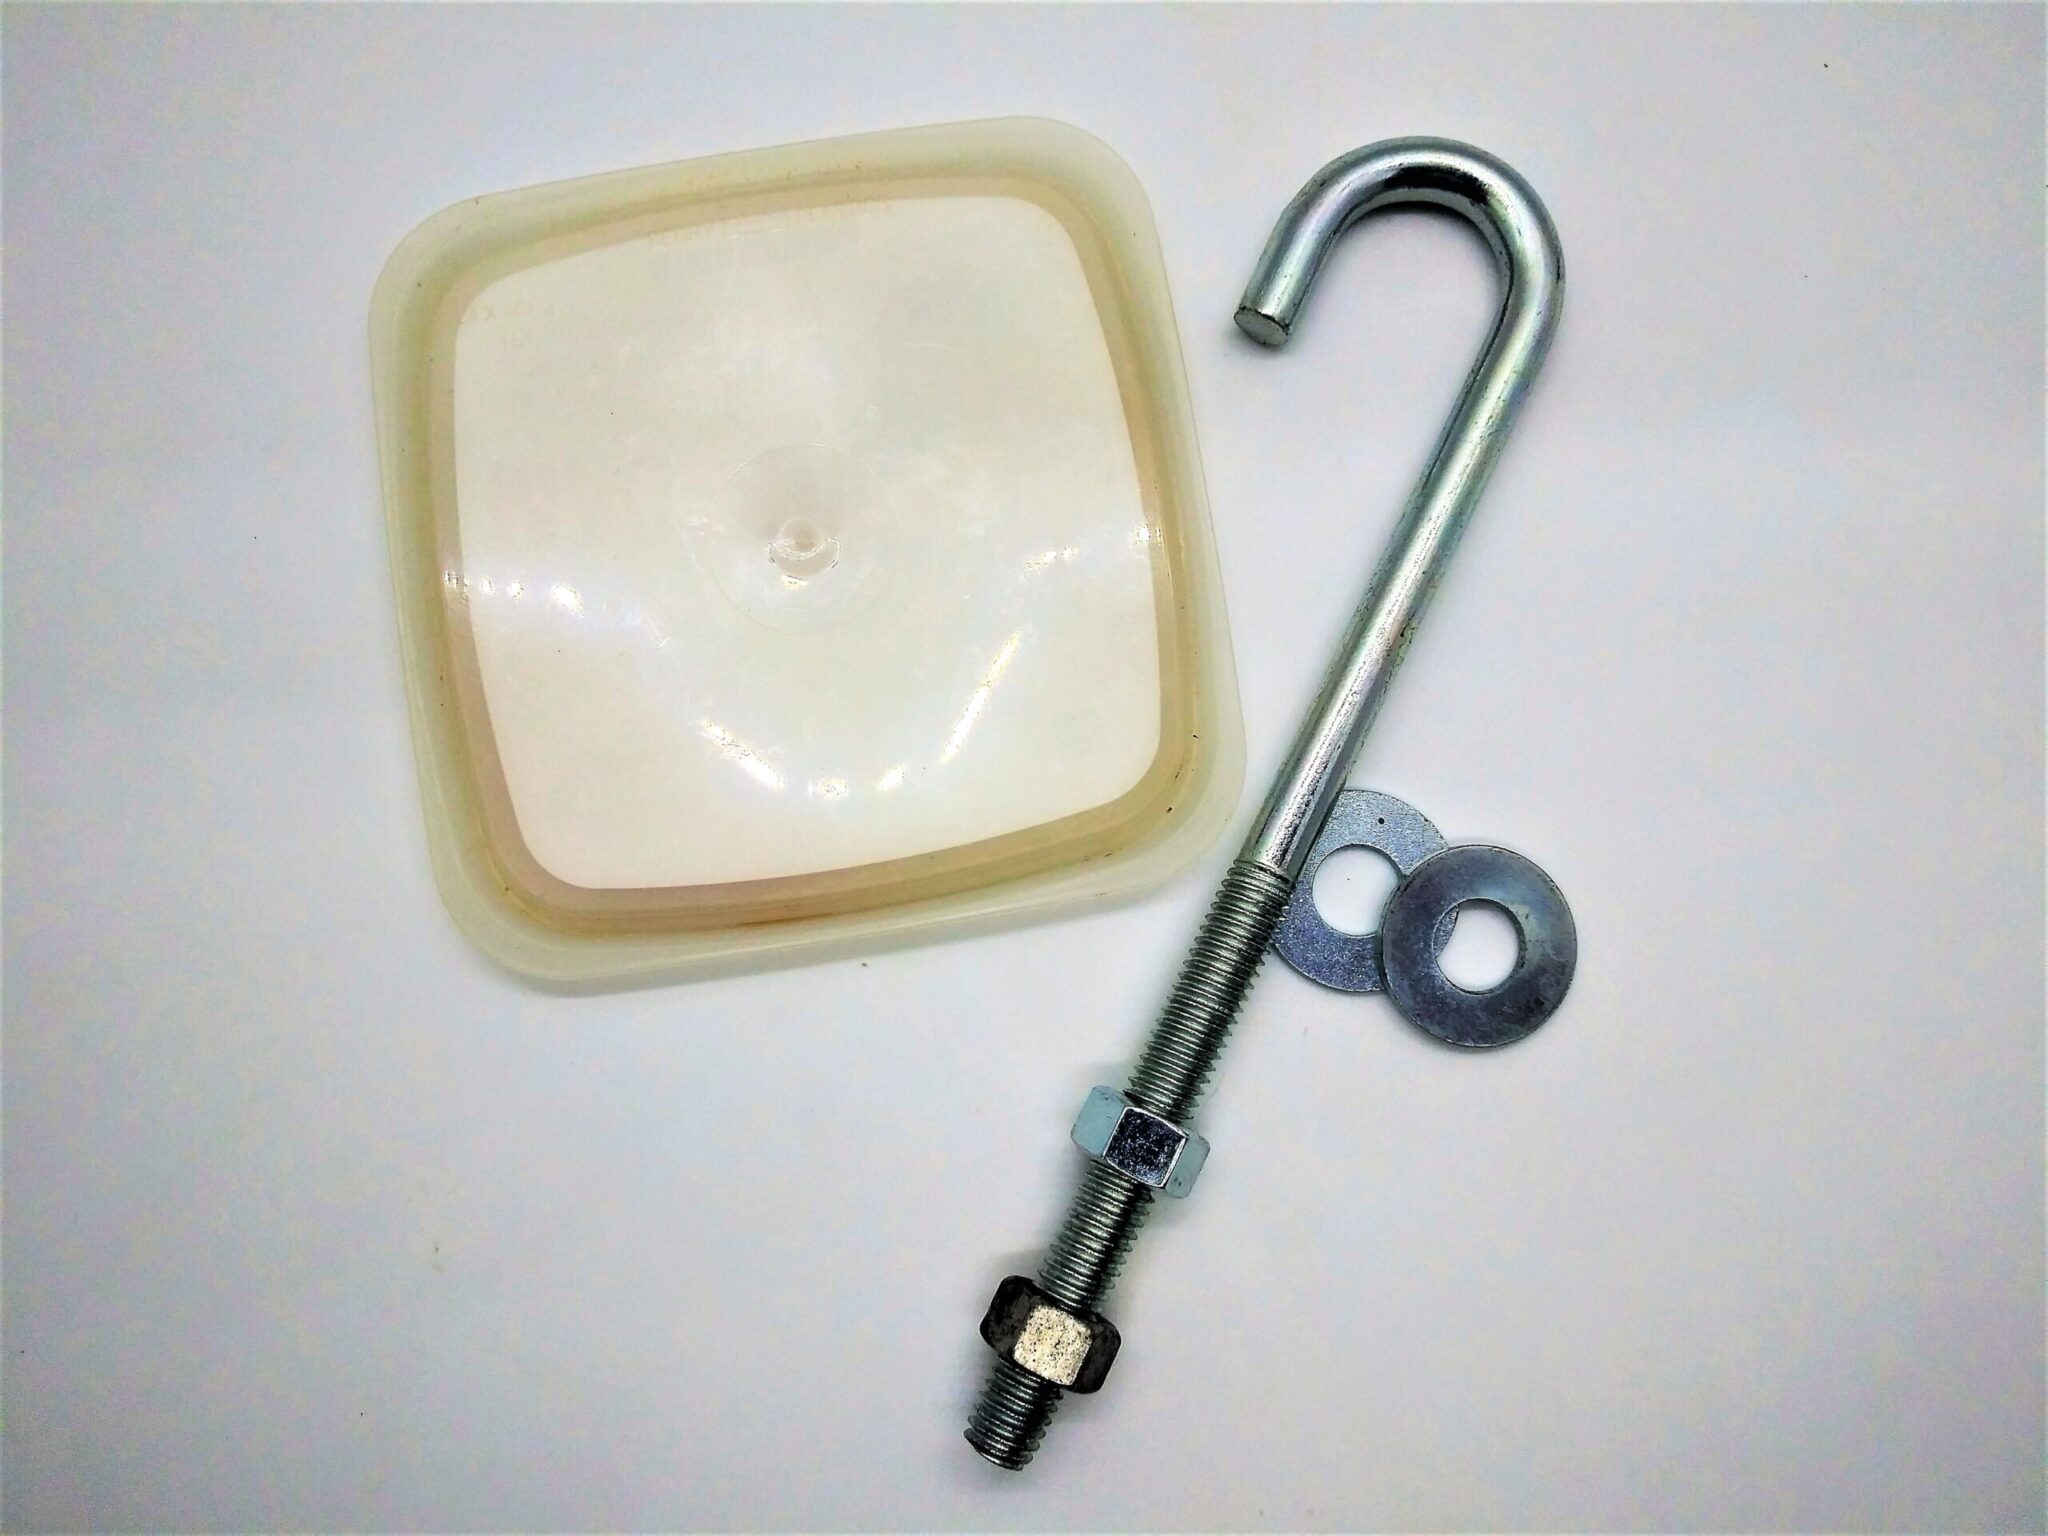 DIY anal sex toy base for longer vegetables. Photo of a plastic lid, 7" long j-bolt, 2 washers and 2 nuts.